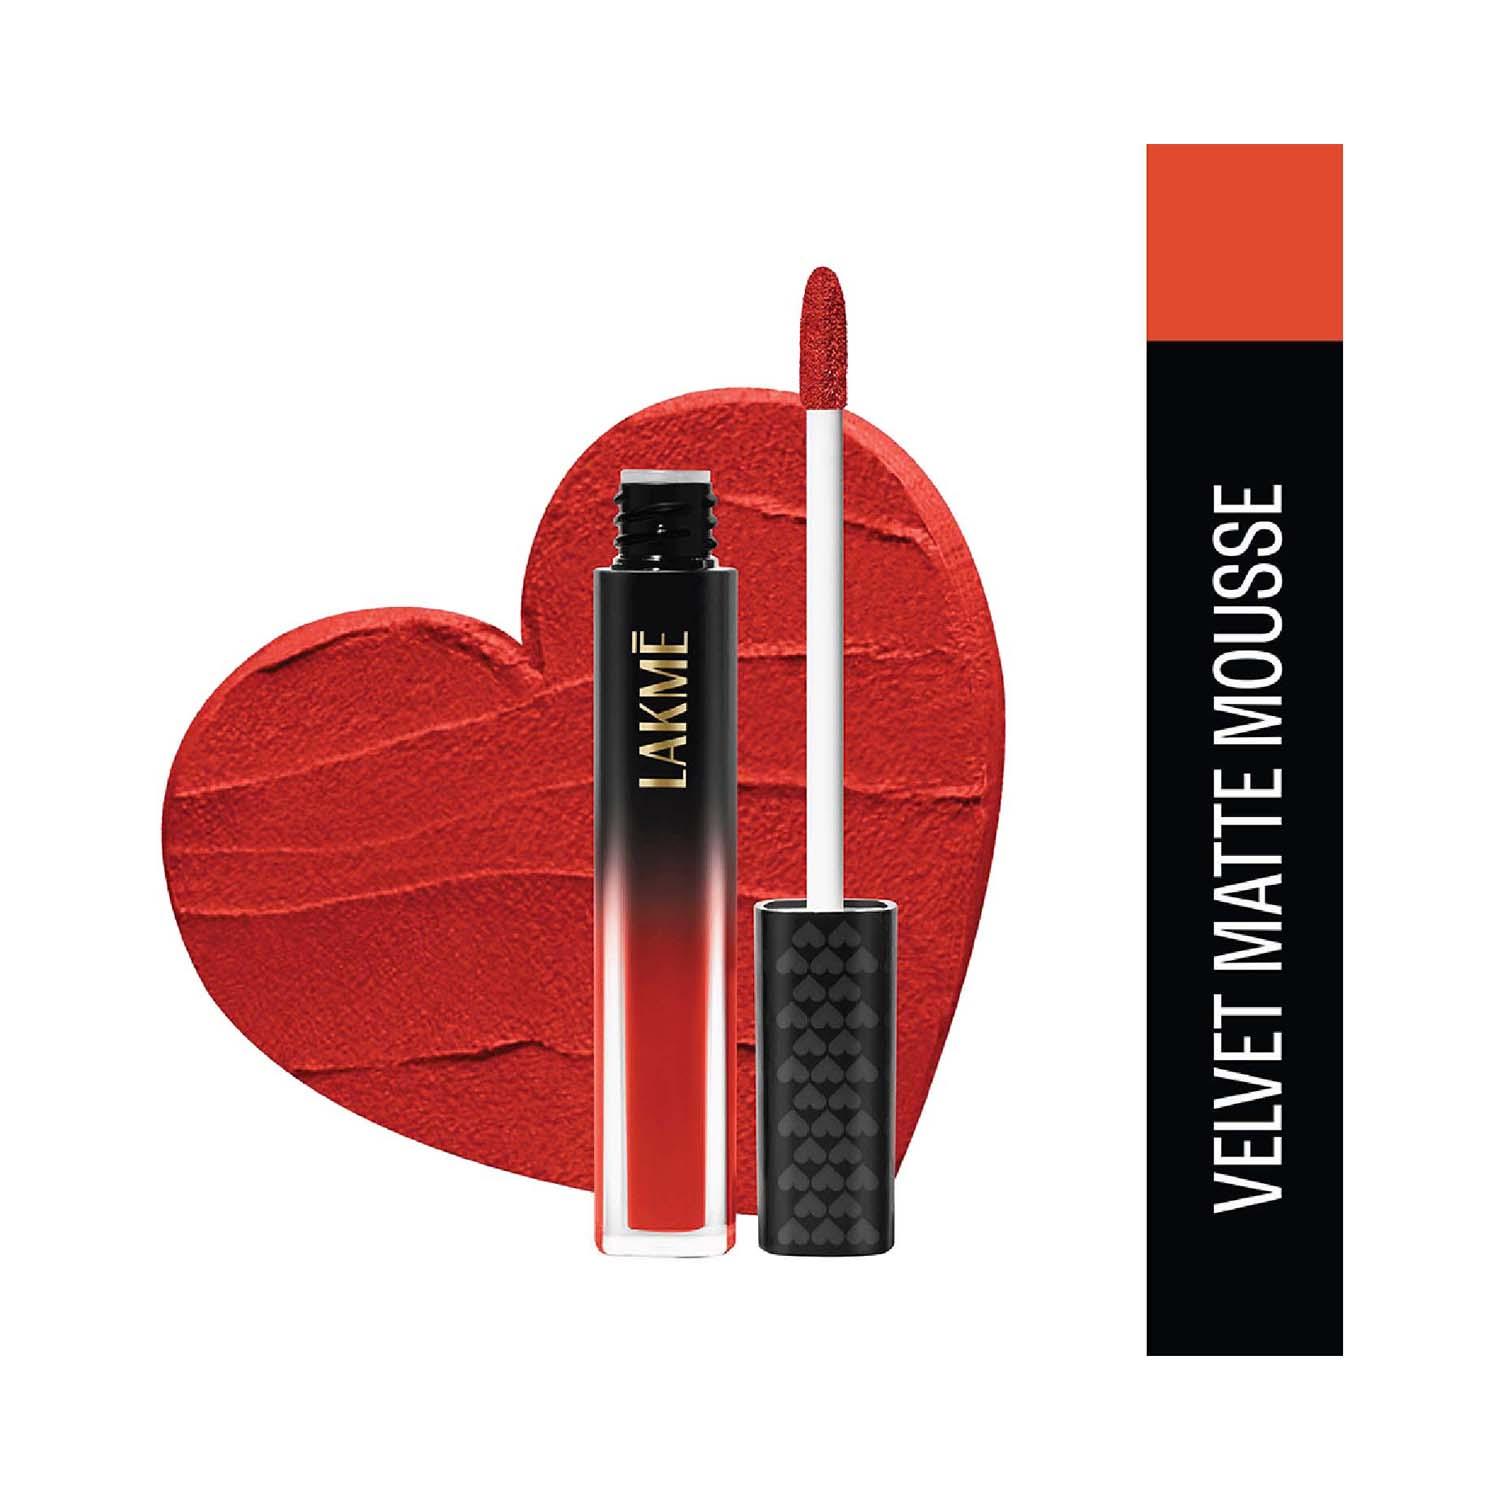 Lakme | Lakme Extraordin-Airy Lip Mousse Liquid Lipstick - New Flame Red (4.6g)